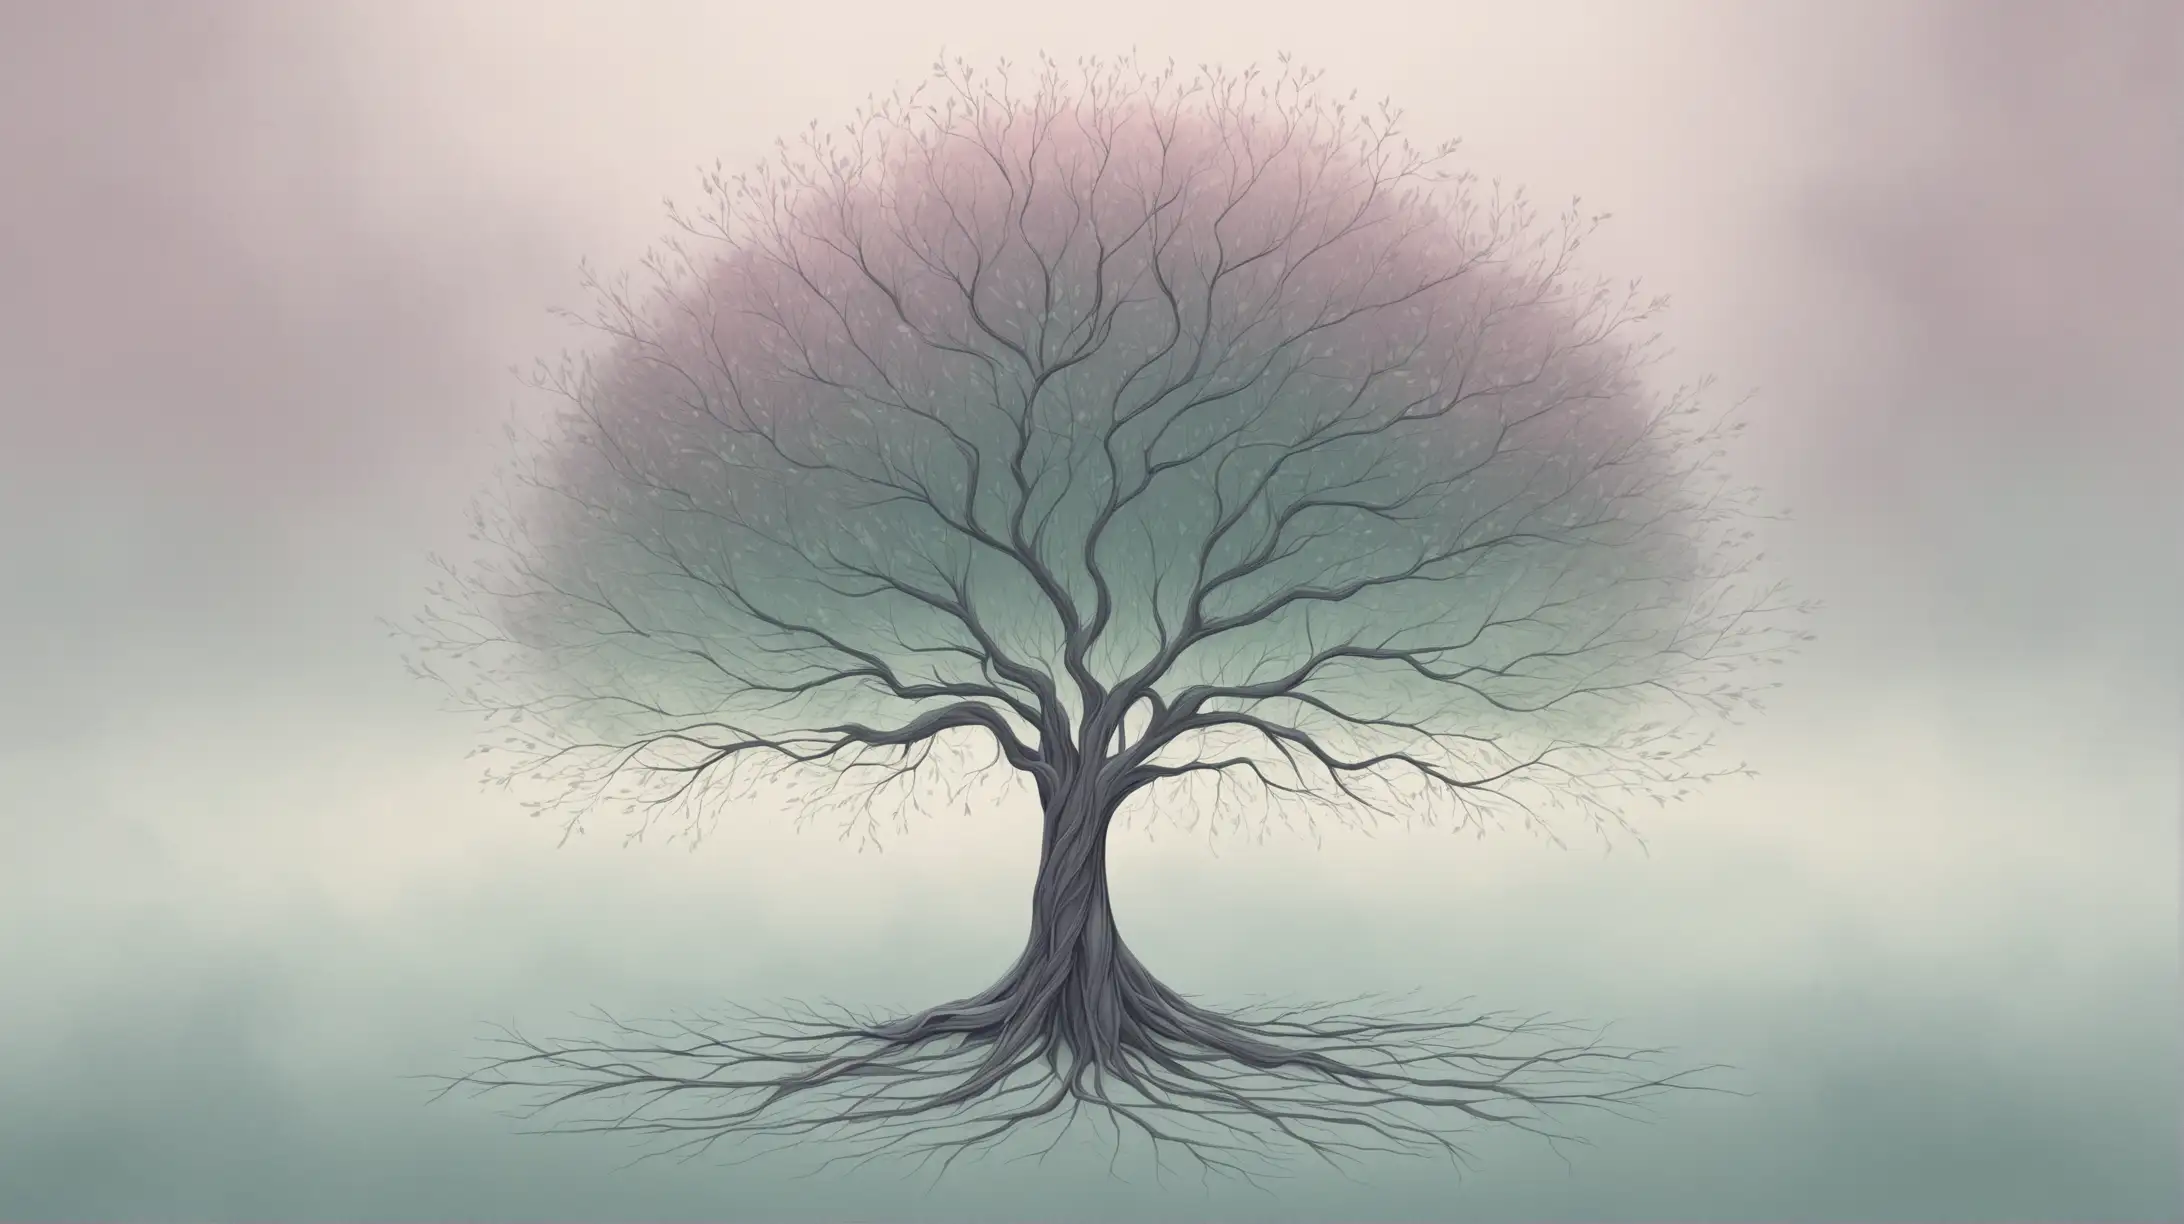 Graceful Dark Purple Tree in Muted Teal and Dusty Rose Mist